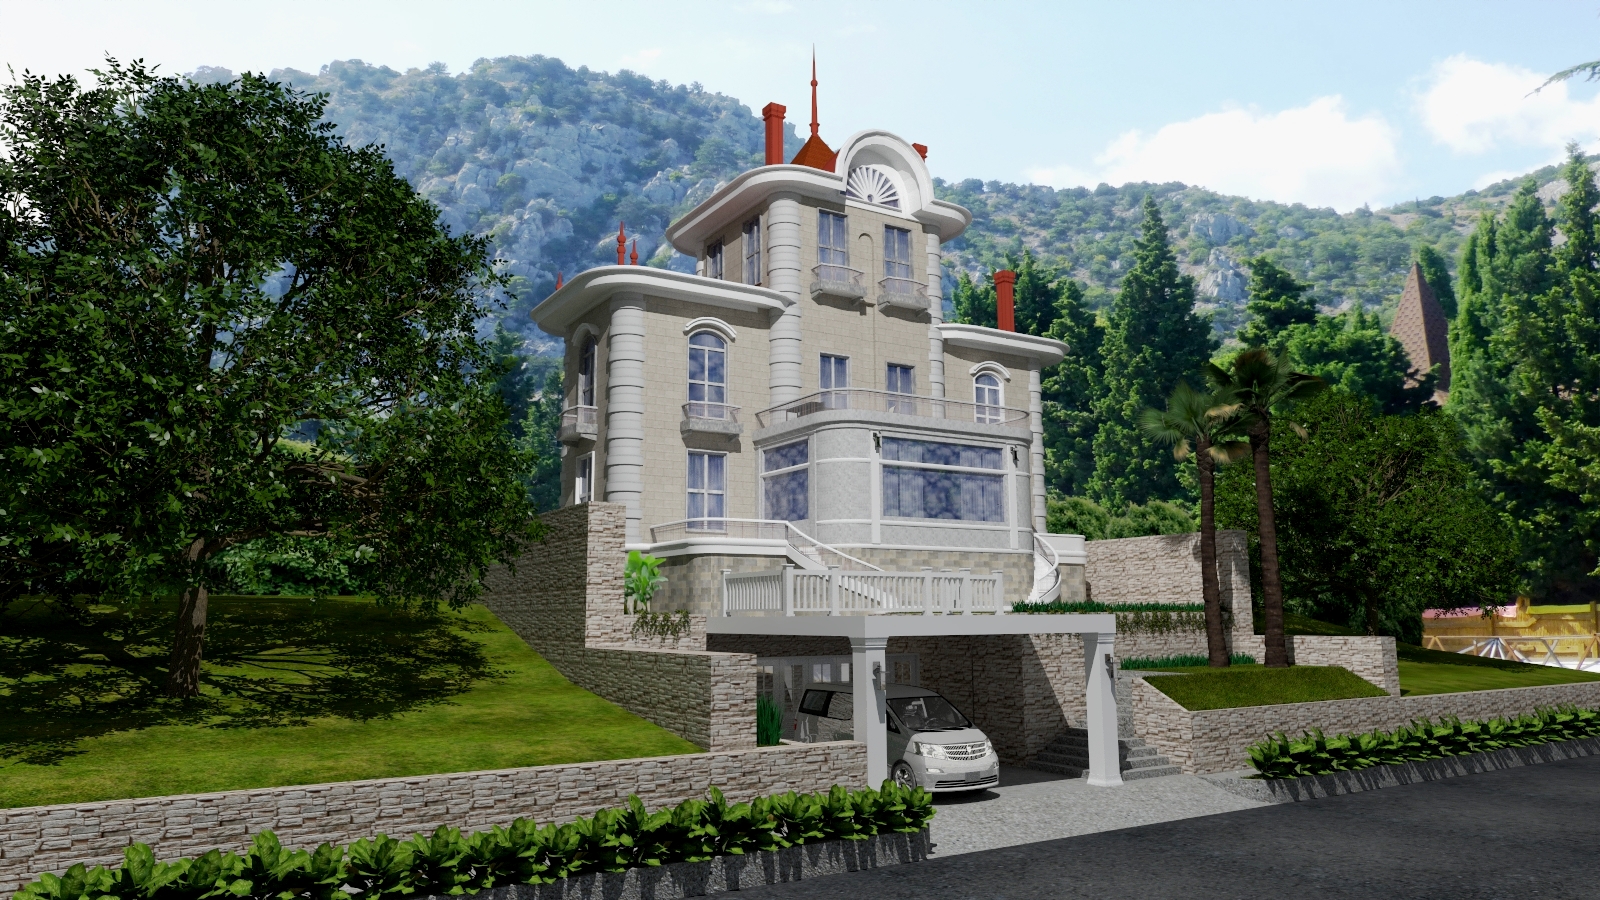 Exterior of the house. in SketchUp vray 3.0 image